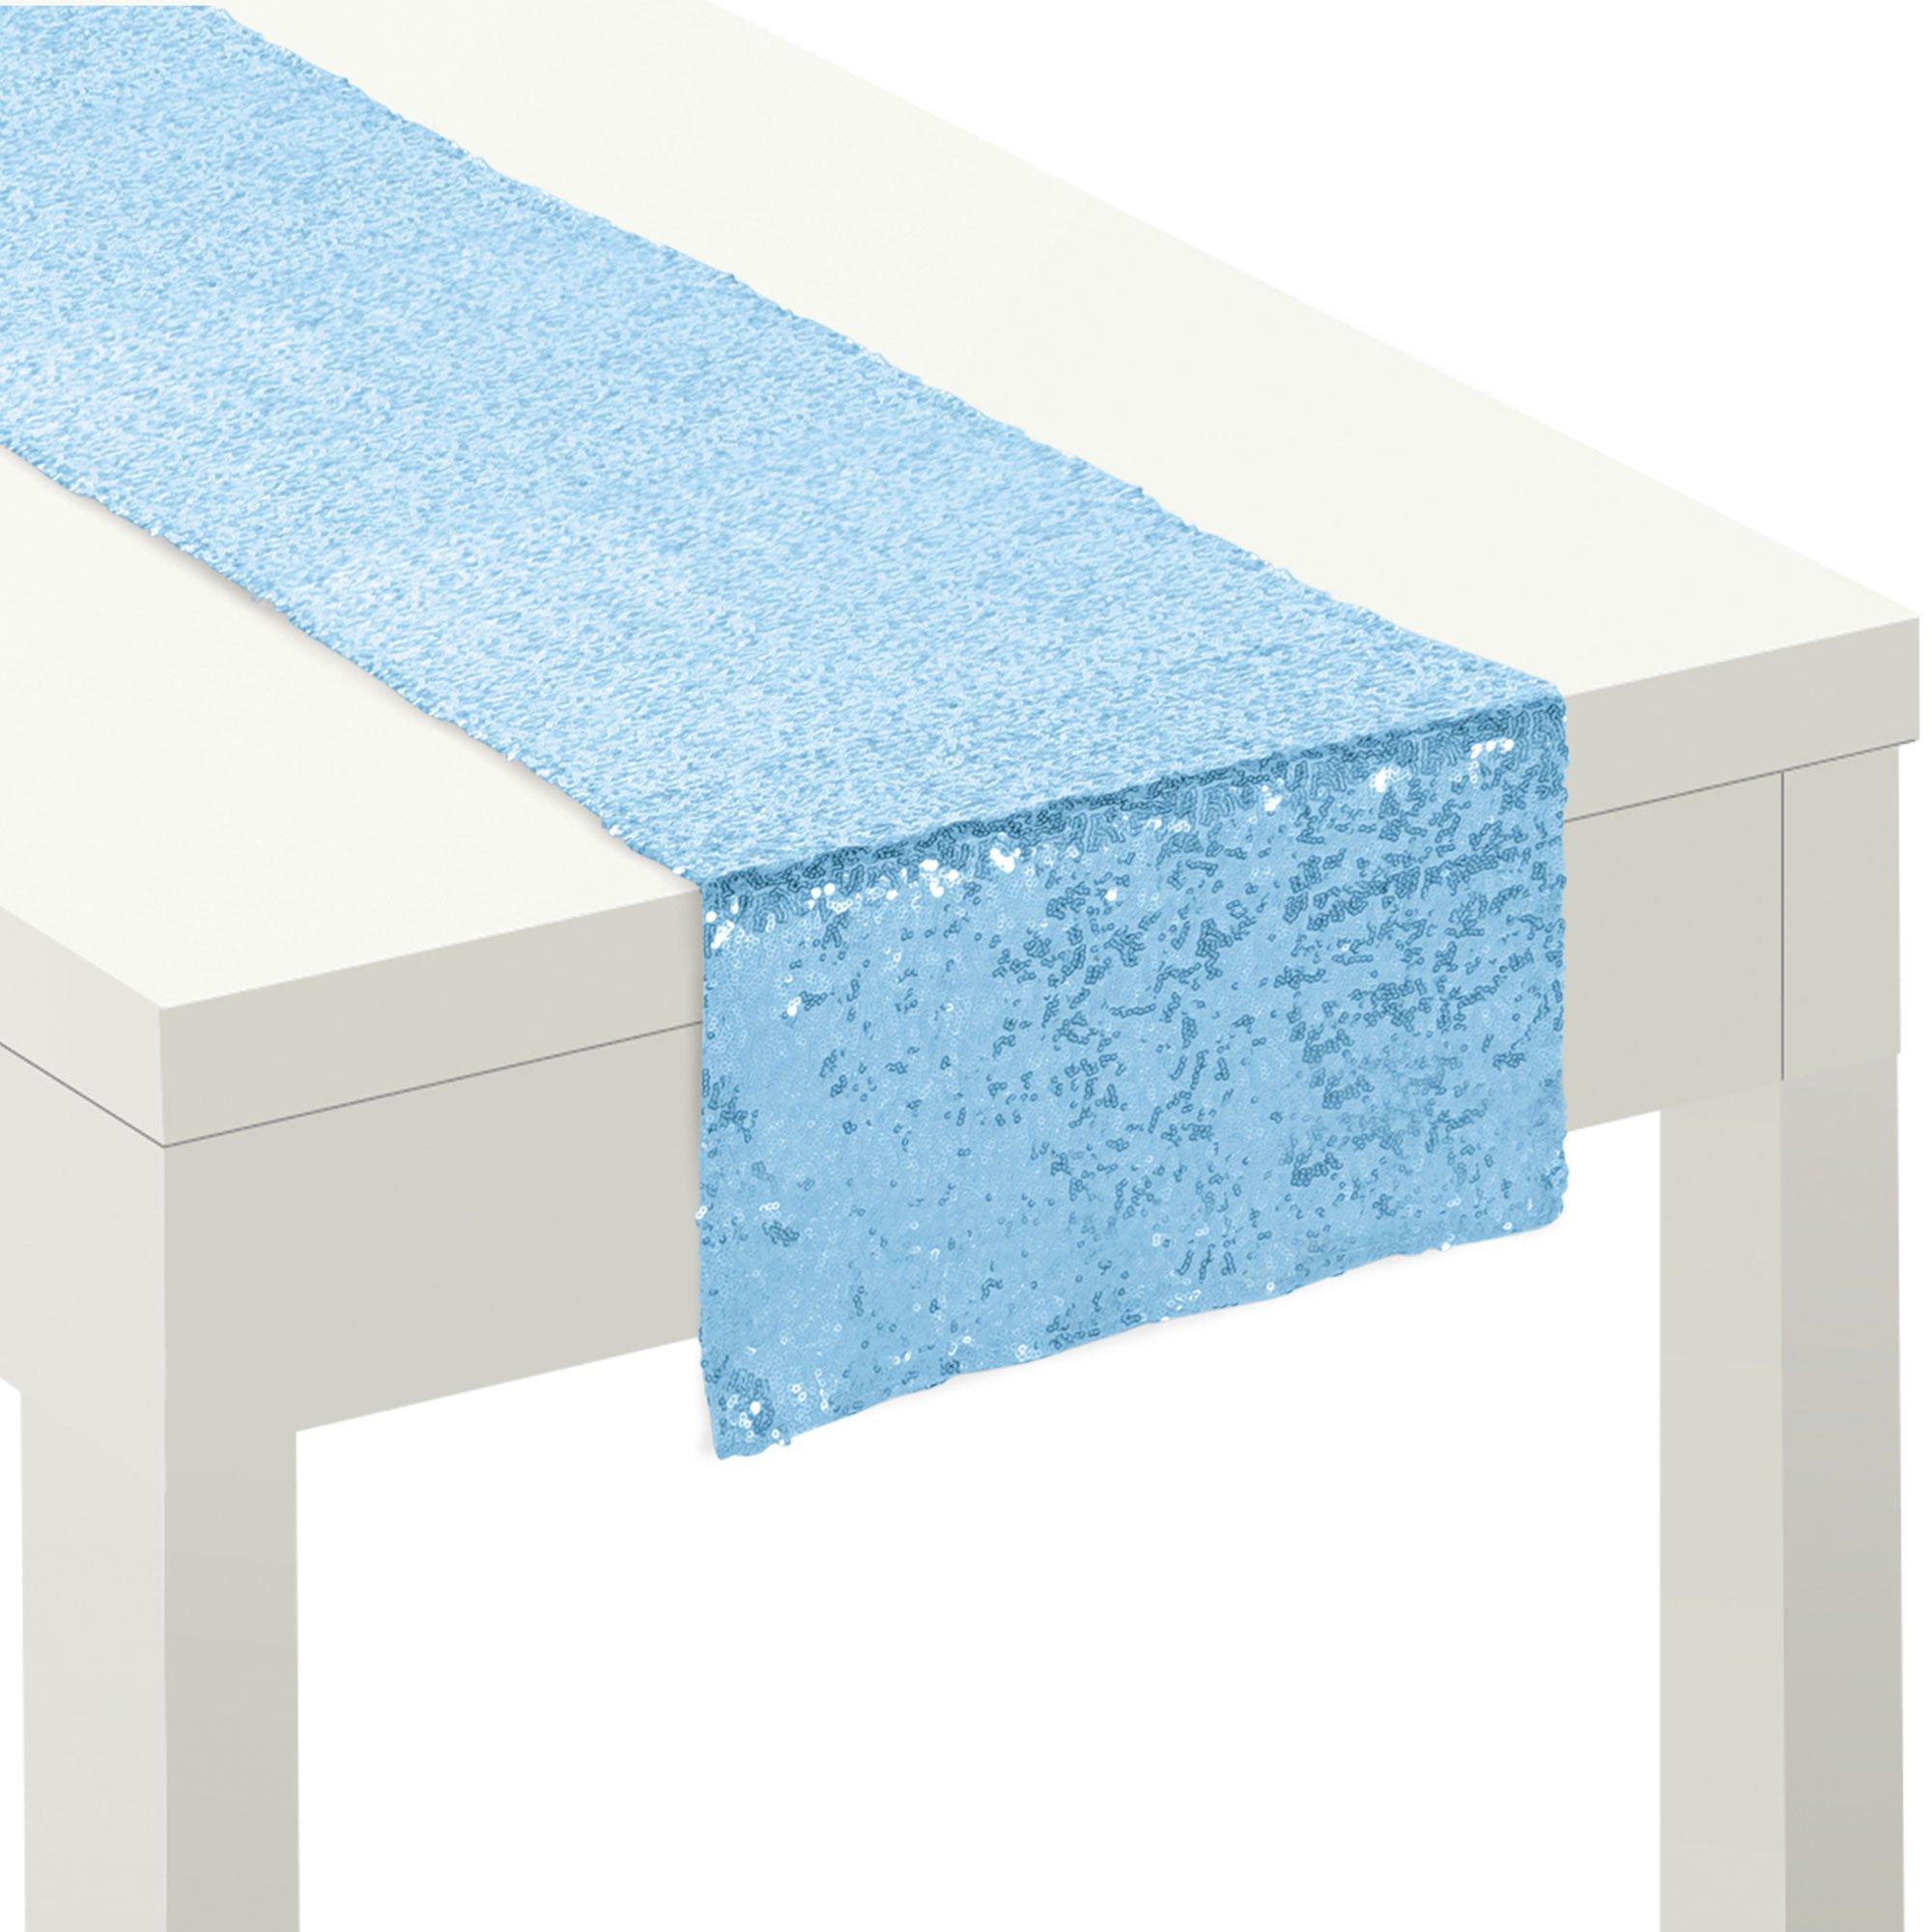 Blue Sequin Table Runner, 13in x 72in - Oh Baby! Boy